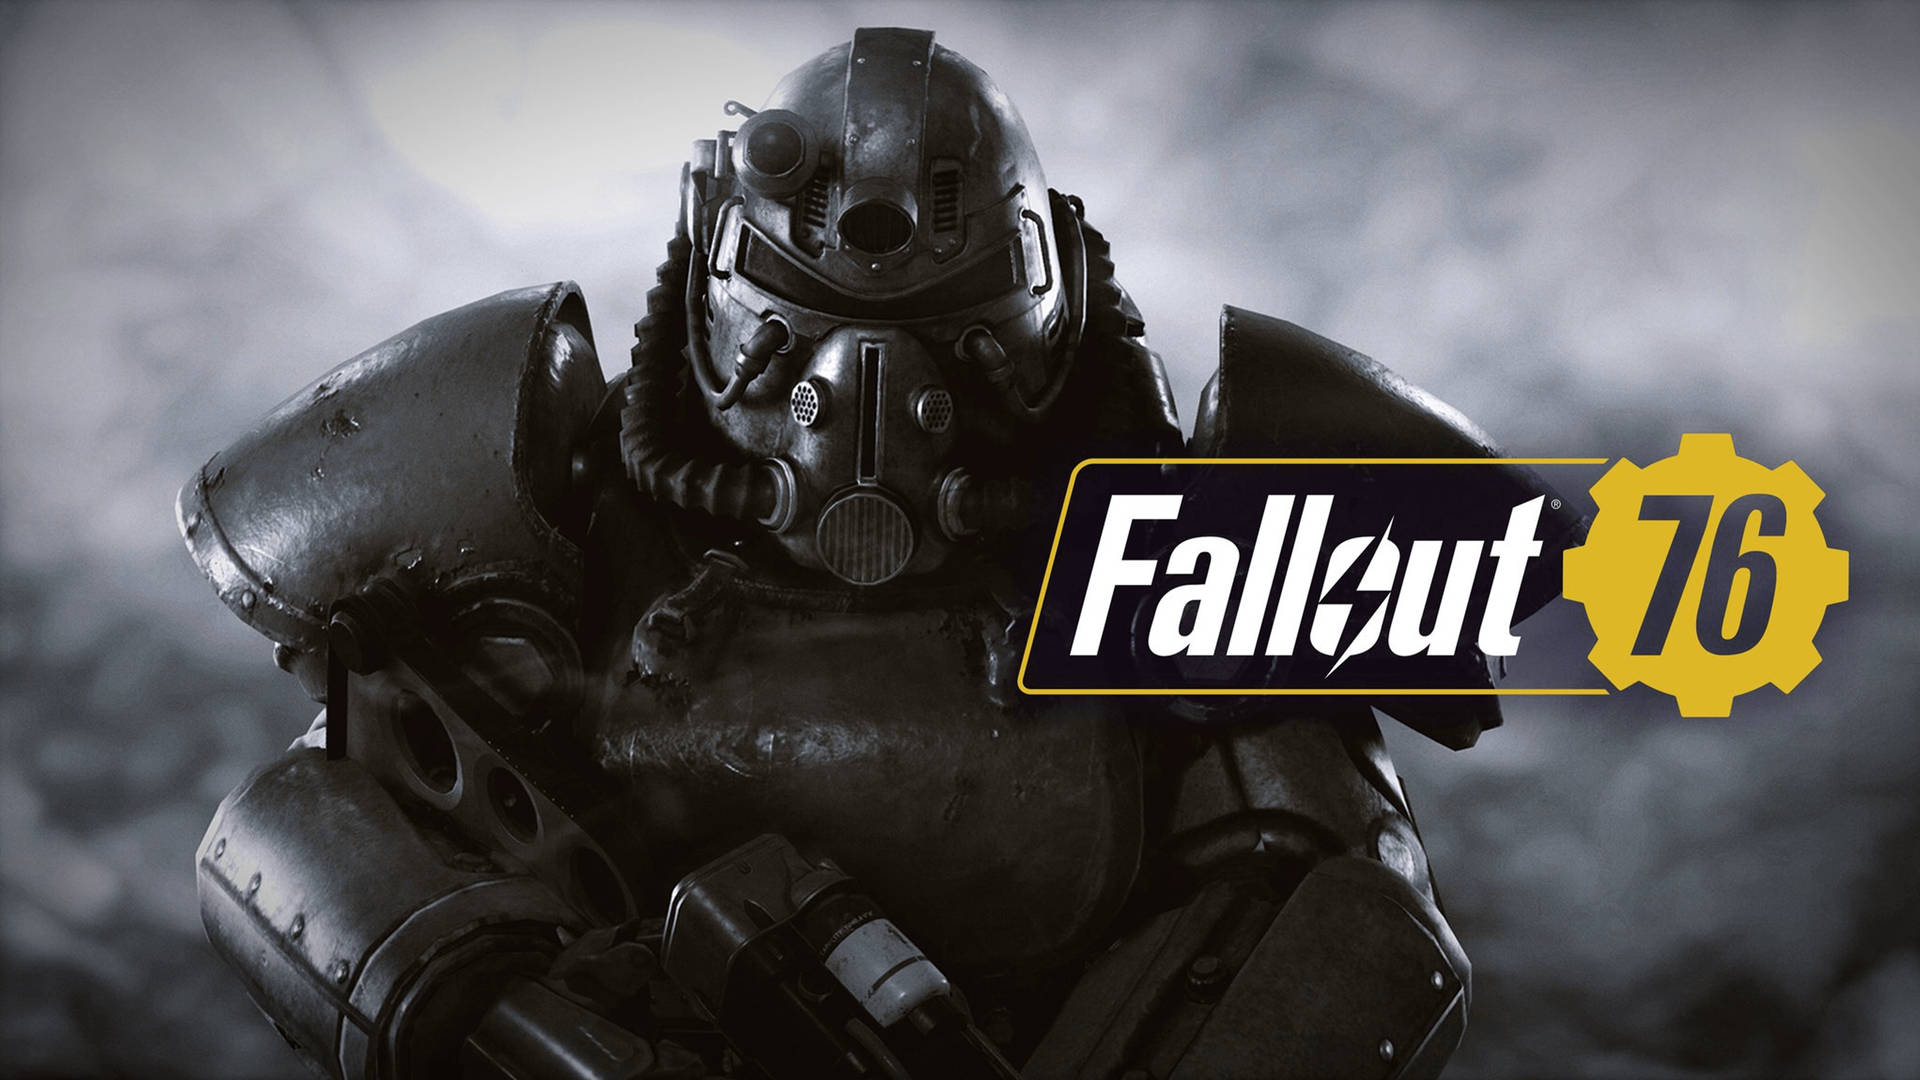 Power Armor Fallout 76 Poster